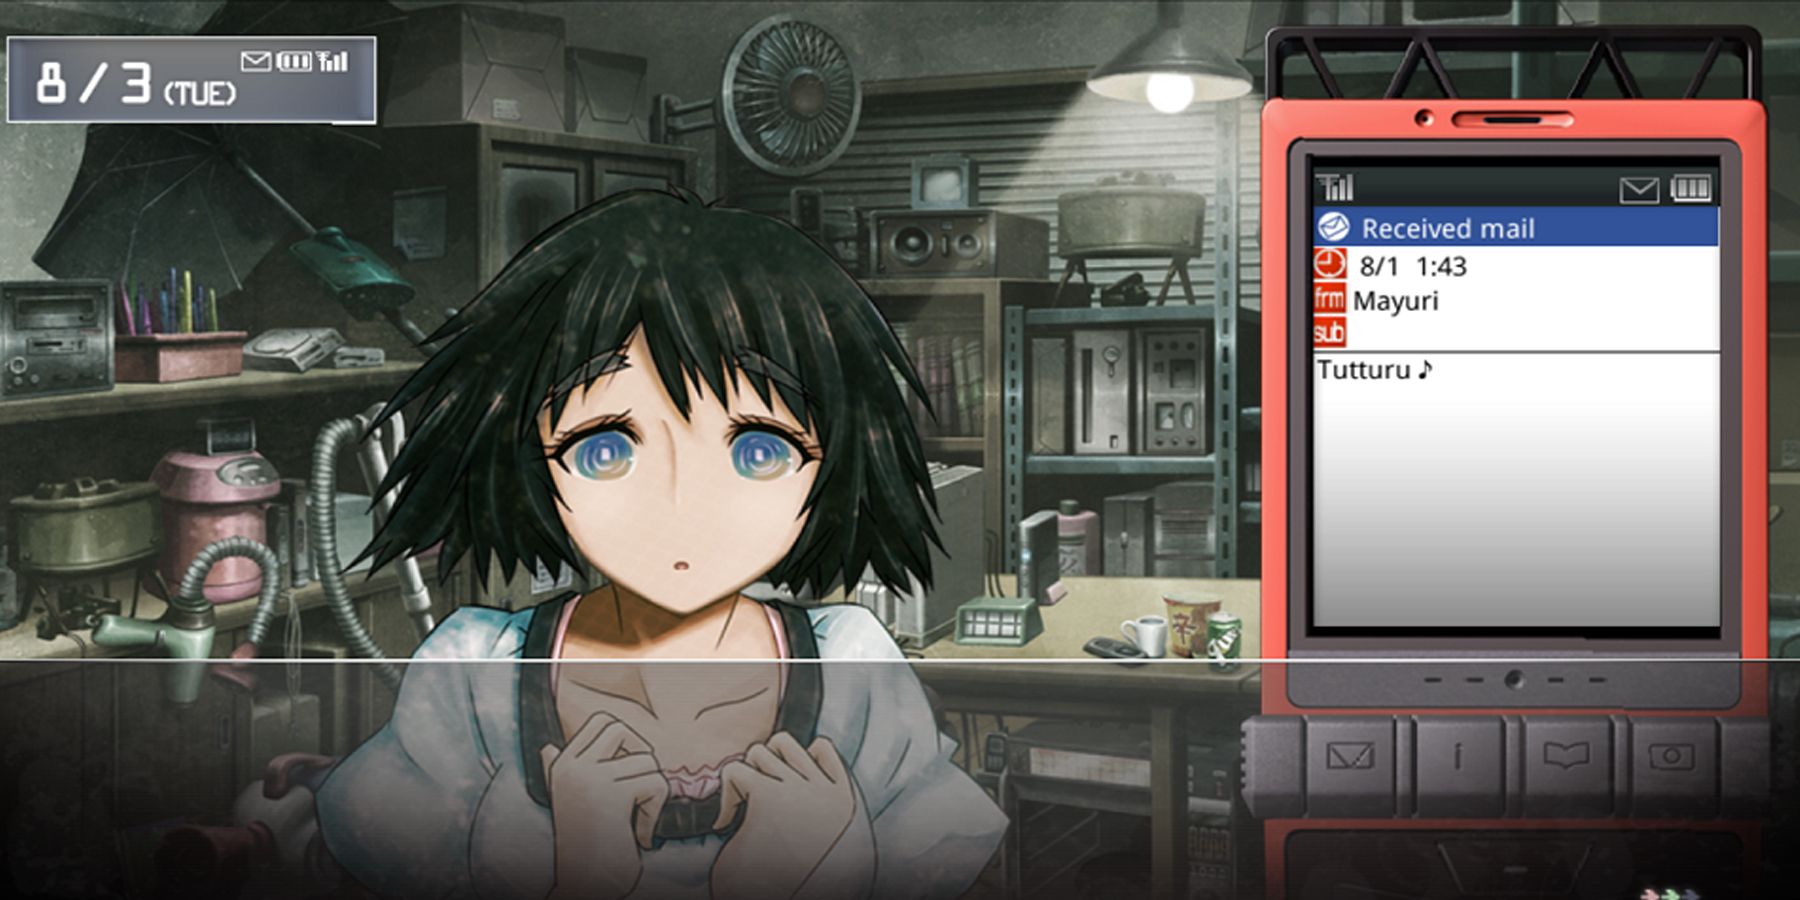 Okabe receiving a text in the Steins Gate visual novel